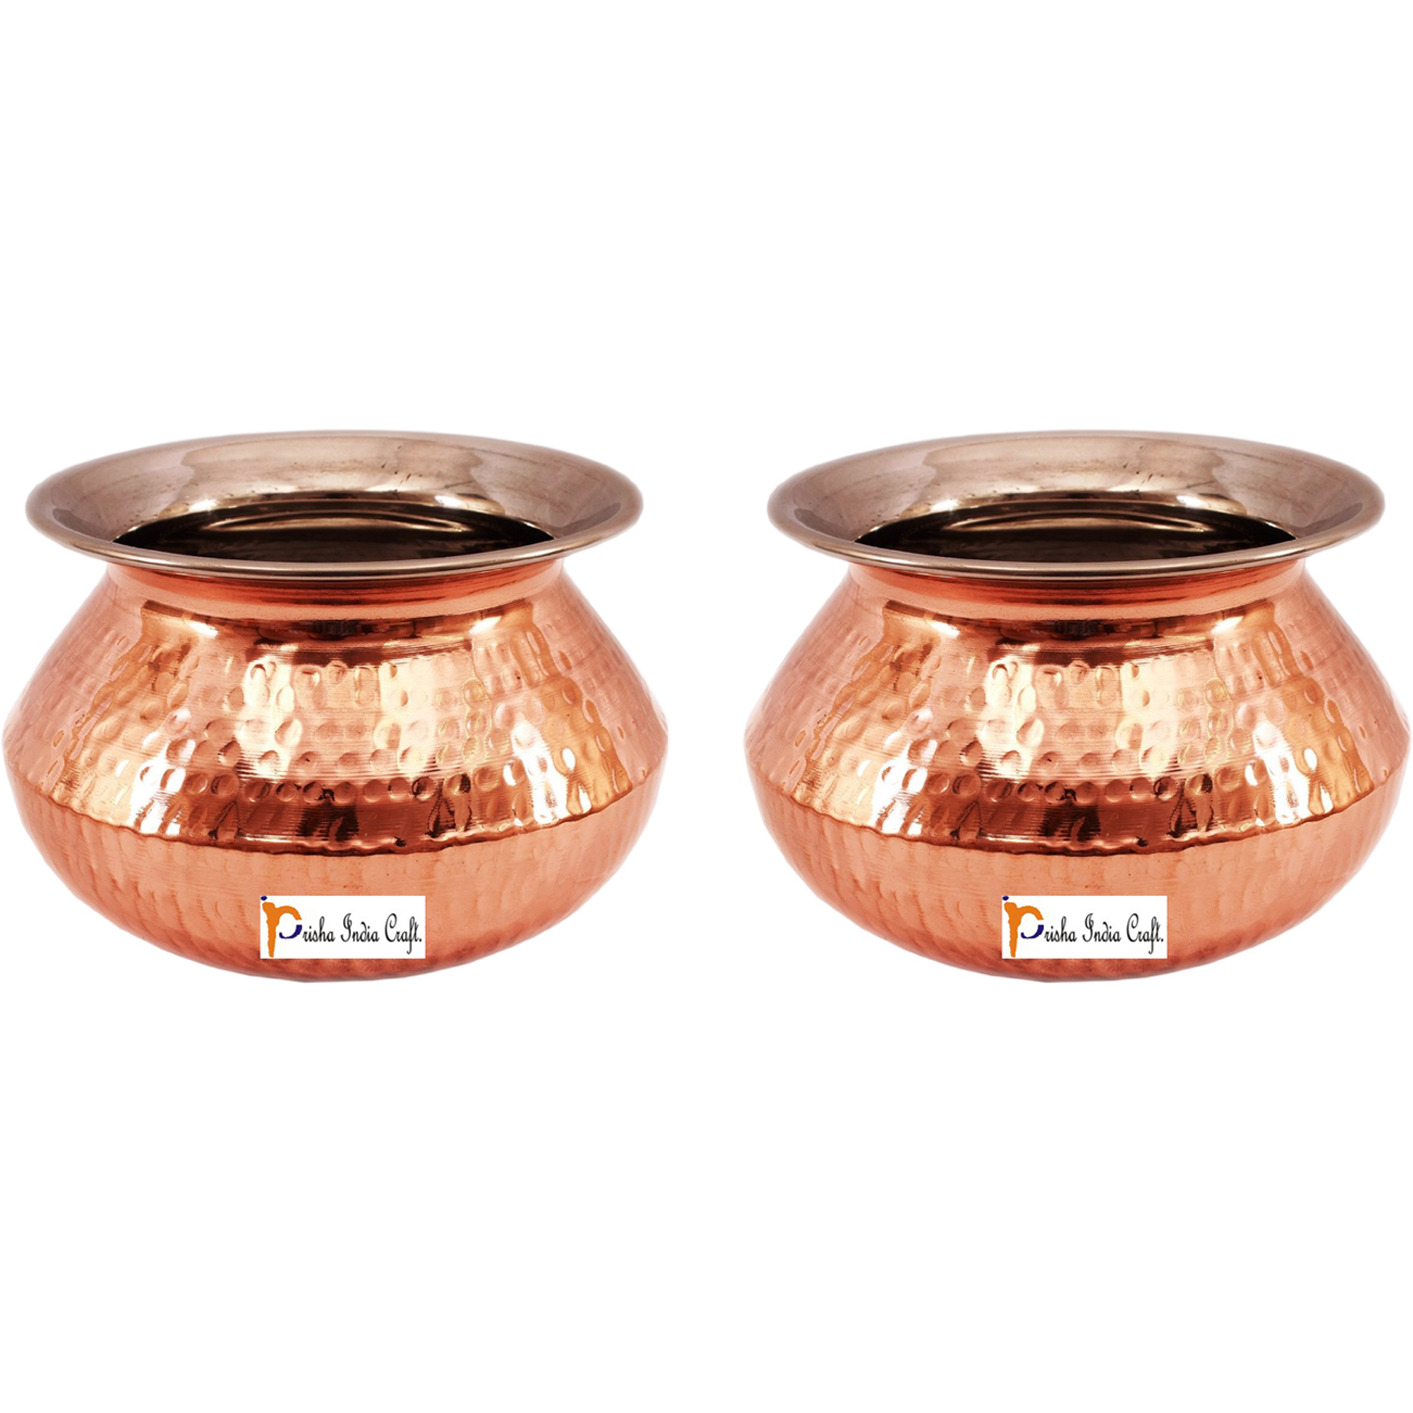 Set of 2 Prisha India Craft B. High Quality Handmade Steel Copper Casserole and Serving Spoon - Set of Copper Handi and Serving Spoon - Copper Bowl Dia - 6.5  X Height - 4.50  - Christmas Gift